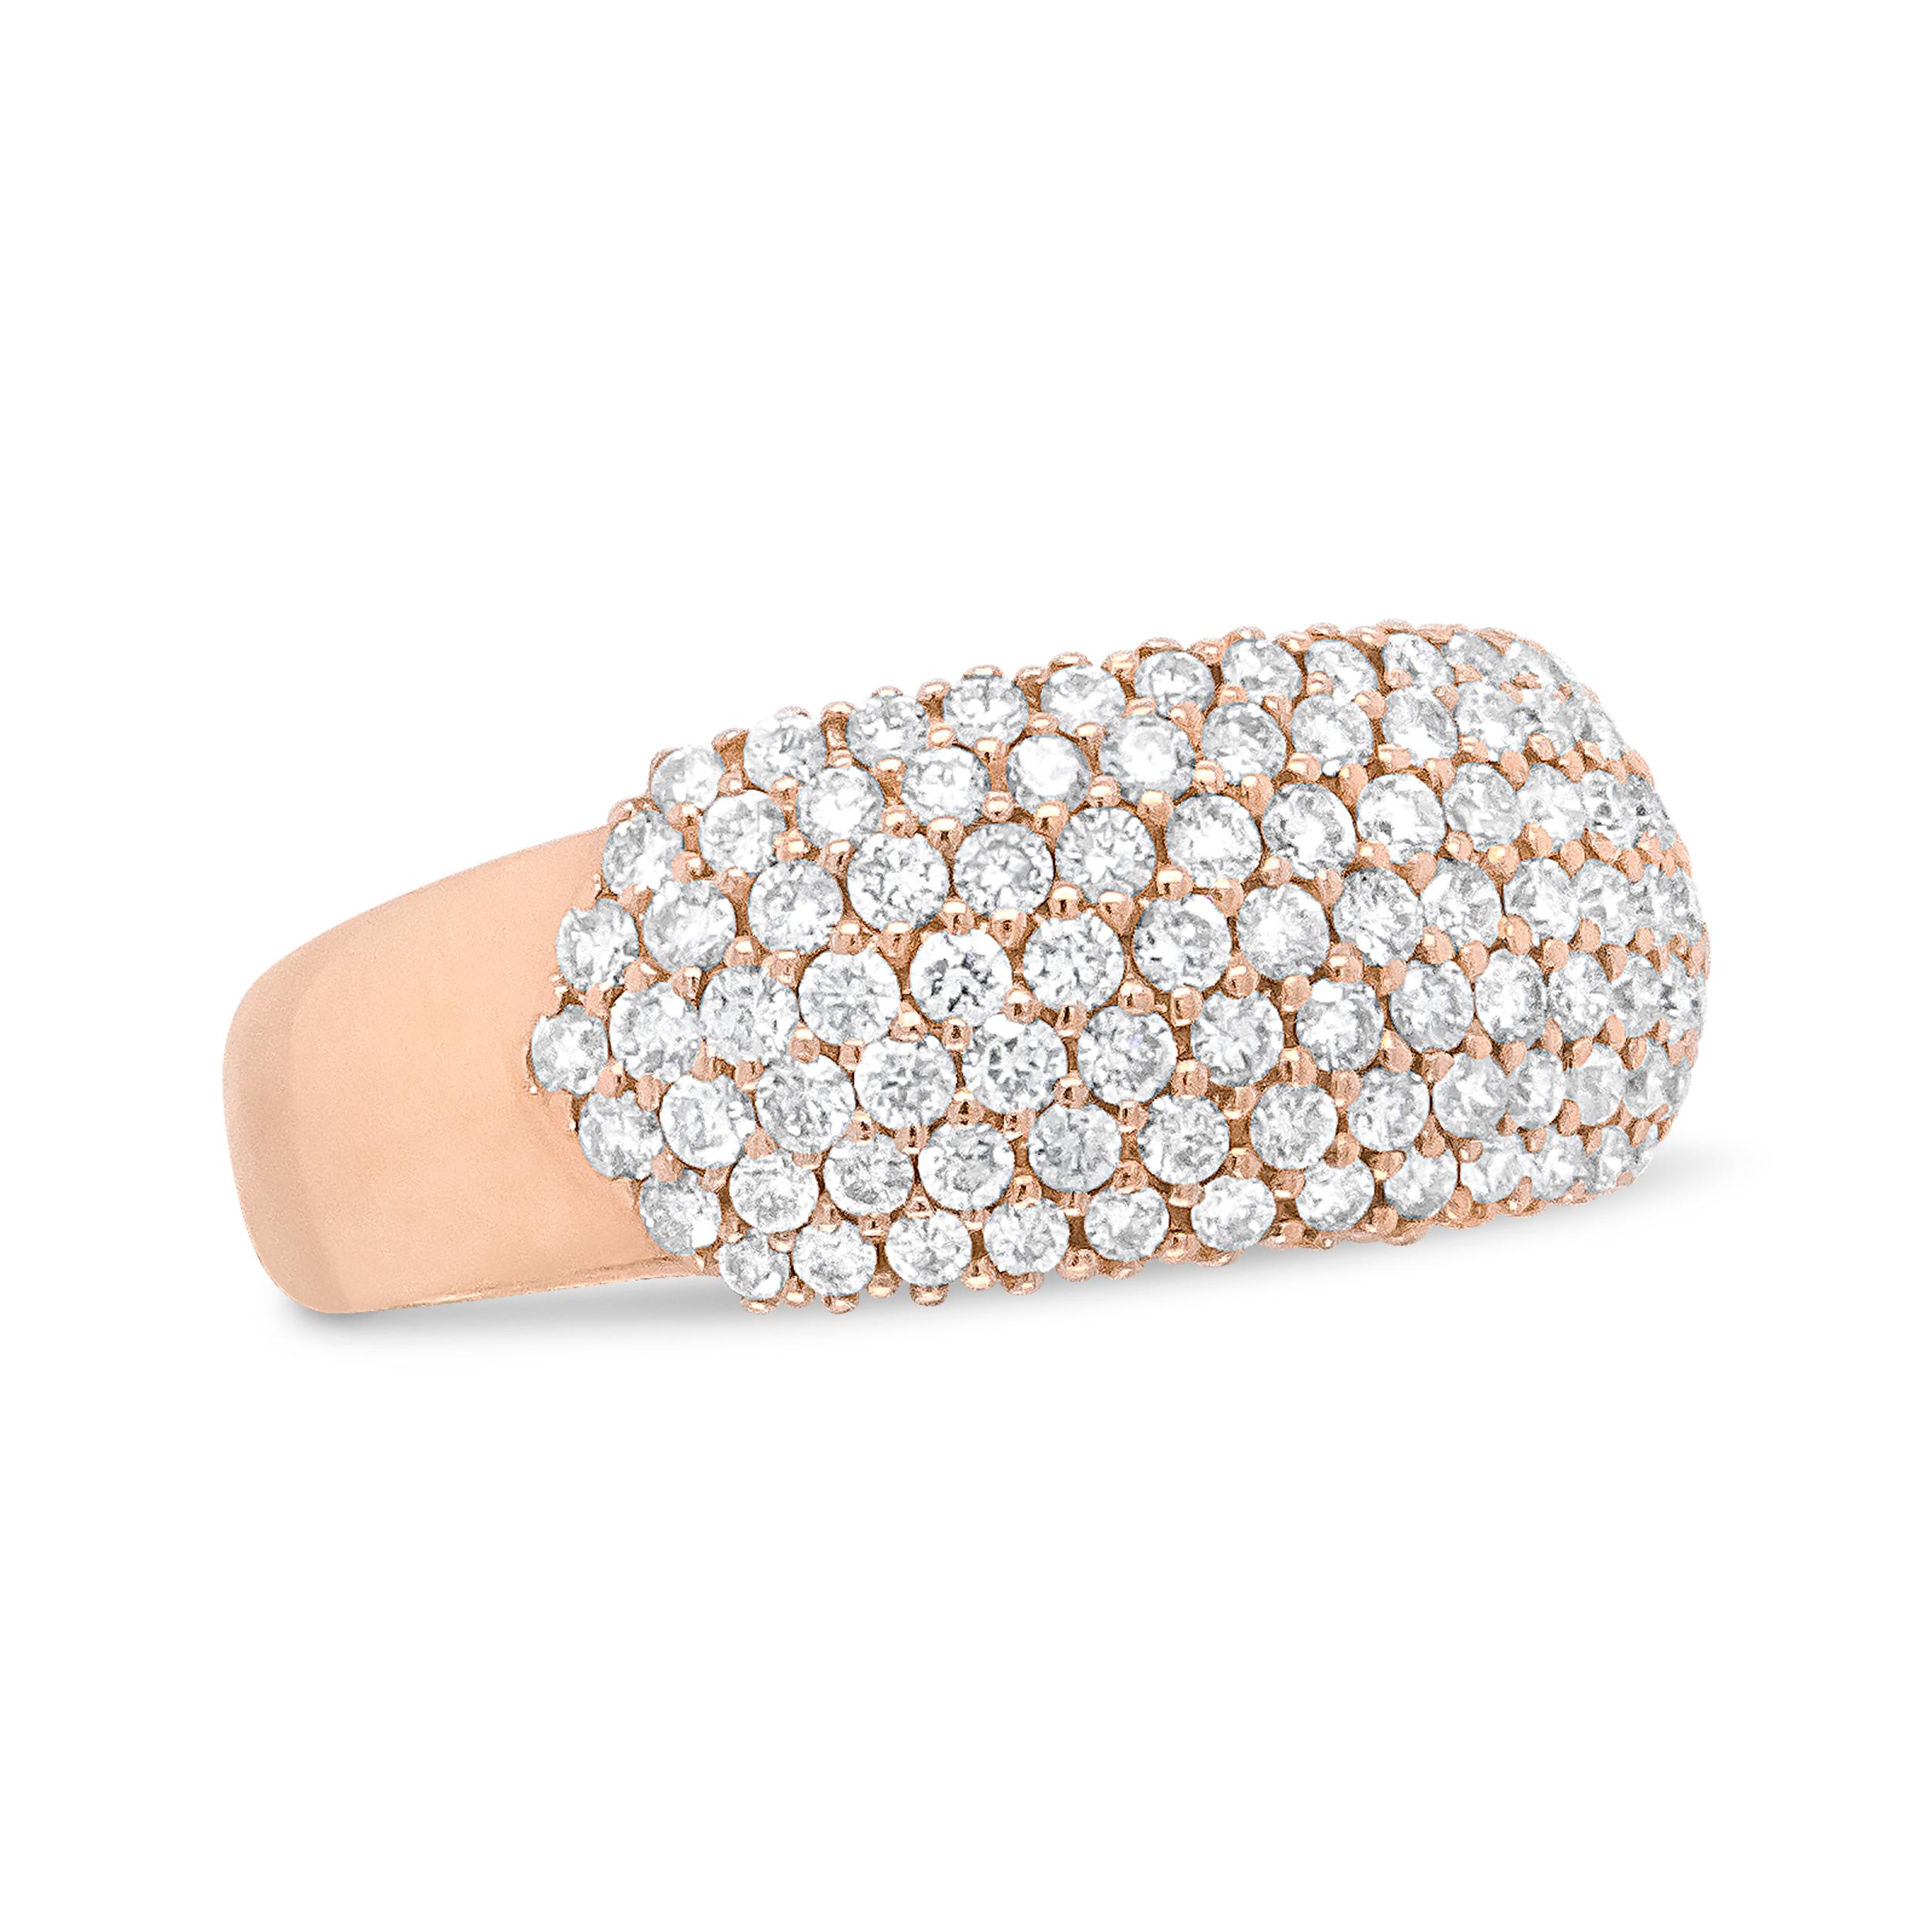 Celebrate life's most special moments with our 18K rose gold 1.00 cttw diamond multi row dome band ring. This elegant and luxurious ring is the perfect gift for any occasion, whether it's an engagement, a wedding, an anniversary, or simply a way to